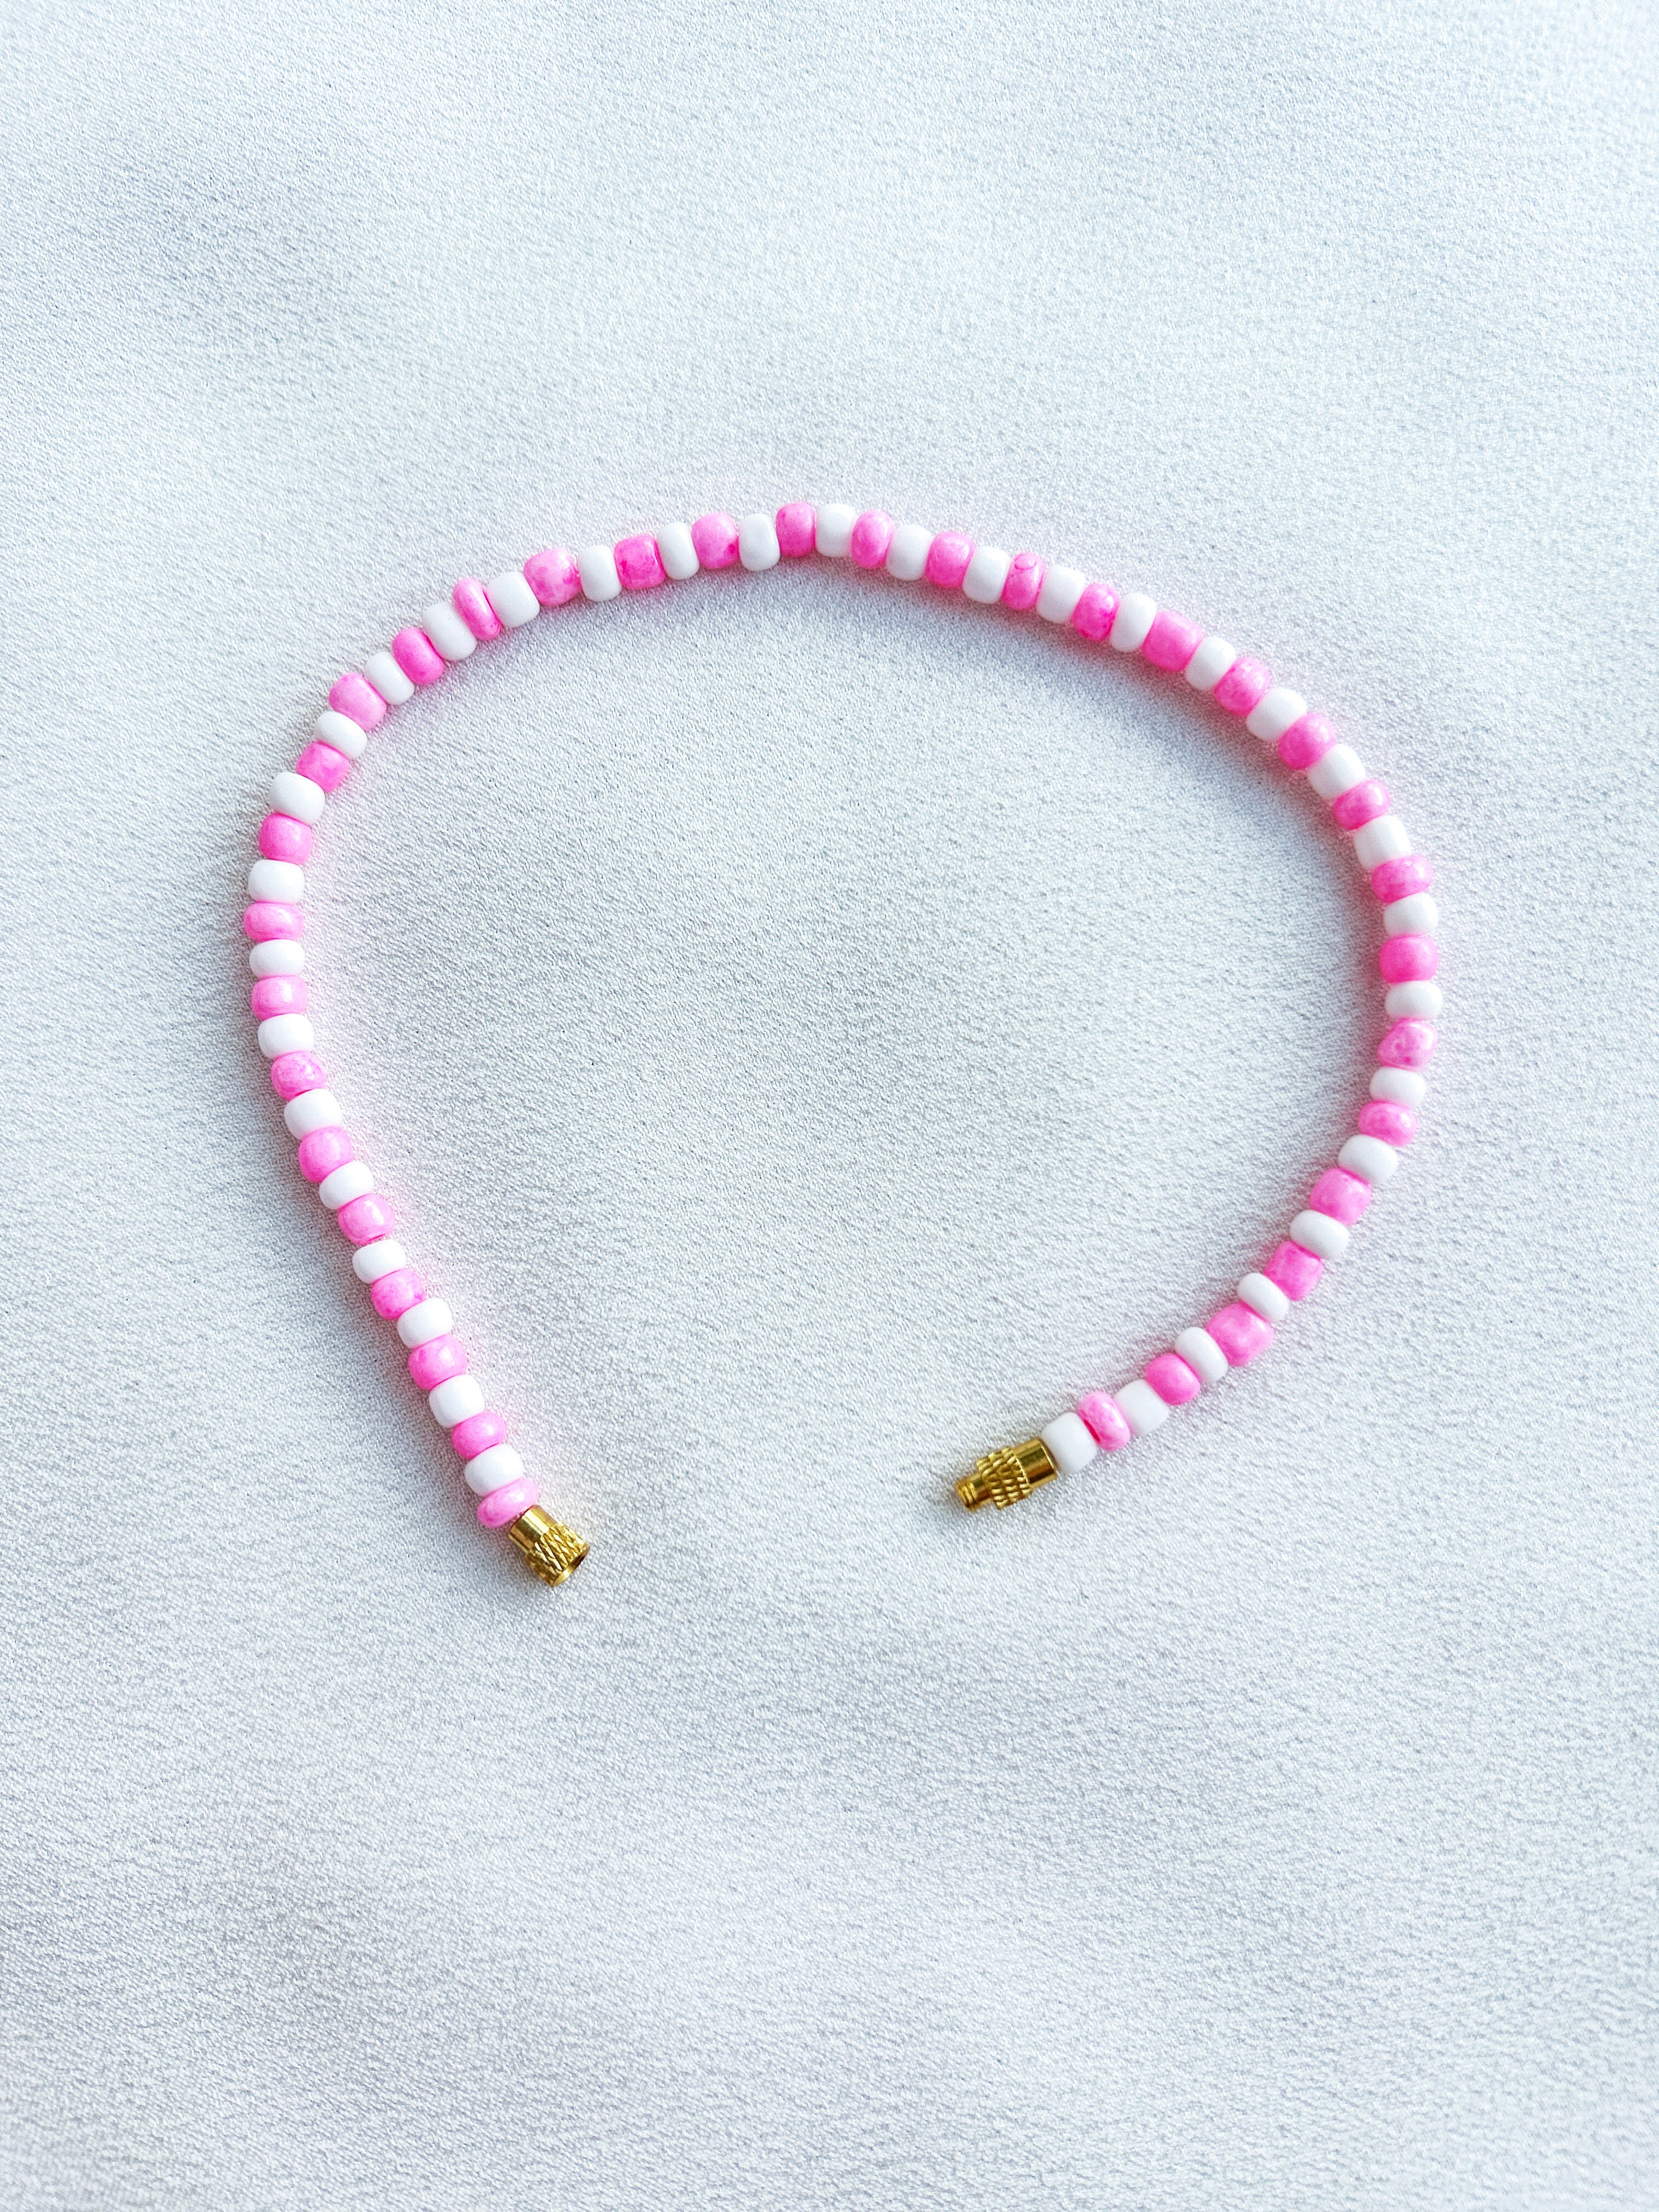 [THE TWO] Anklet/Bracelet: White/Pink [Large Beads]